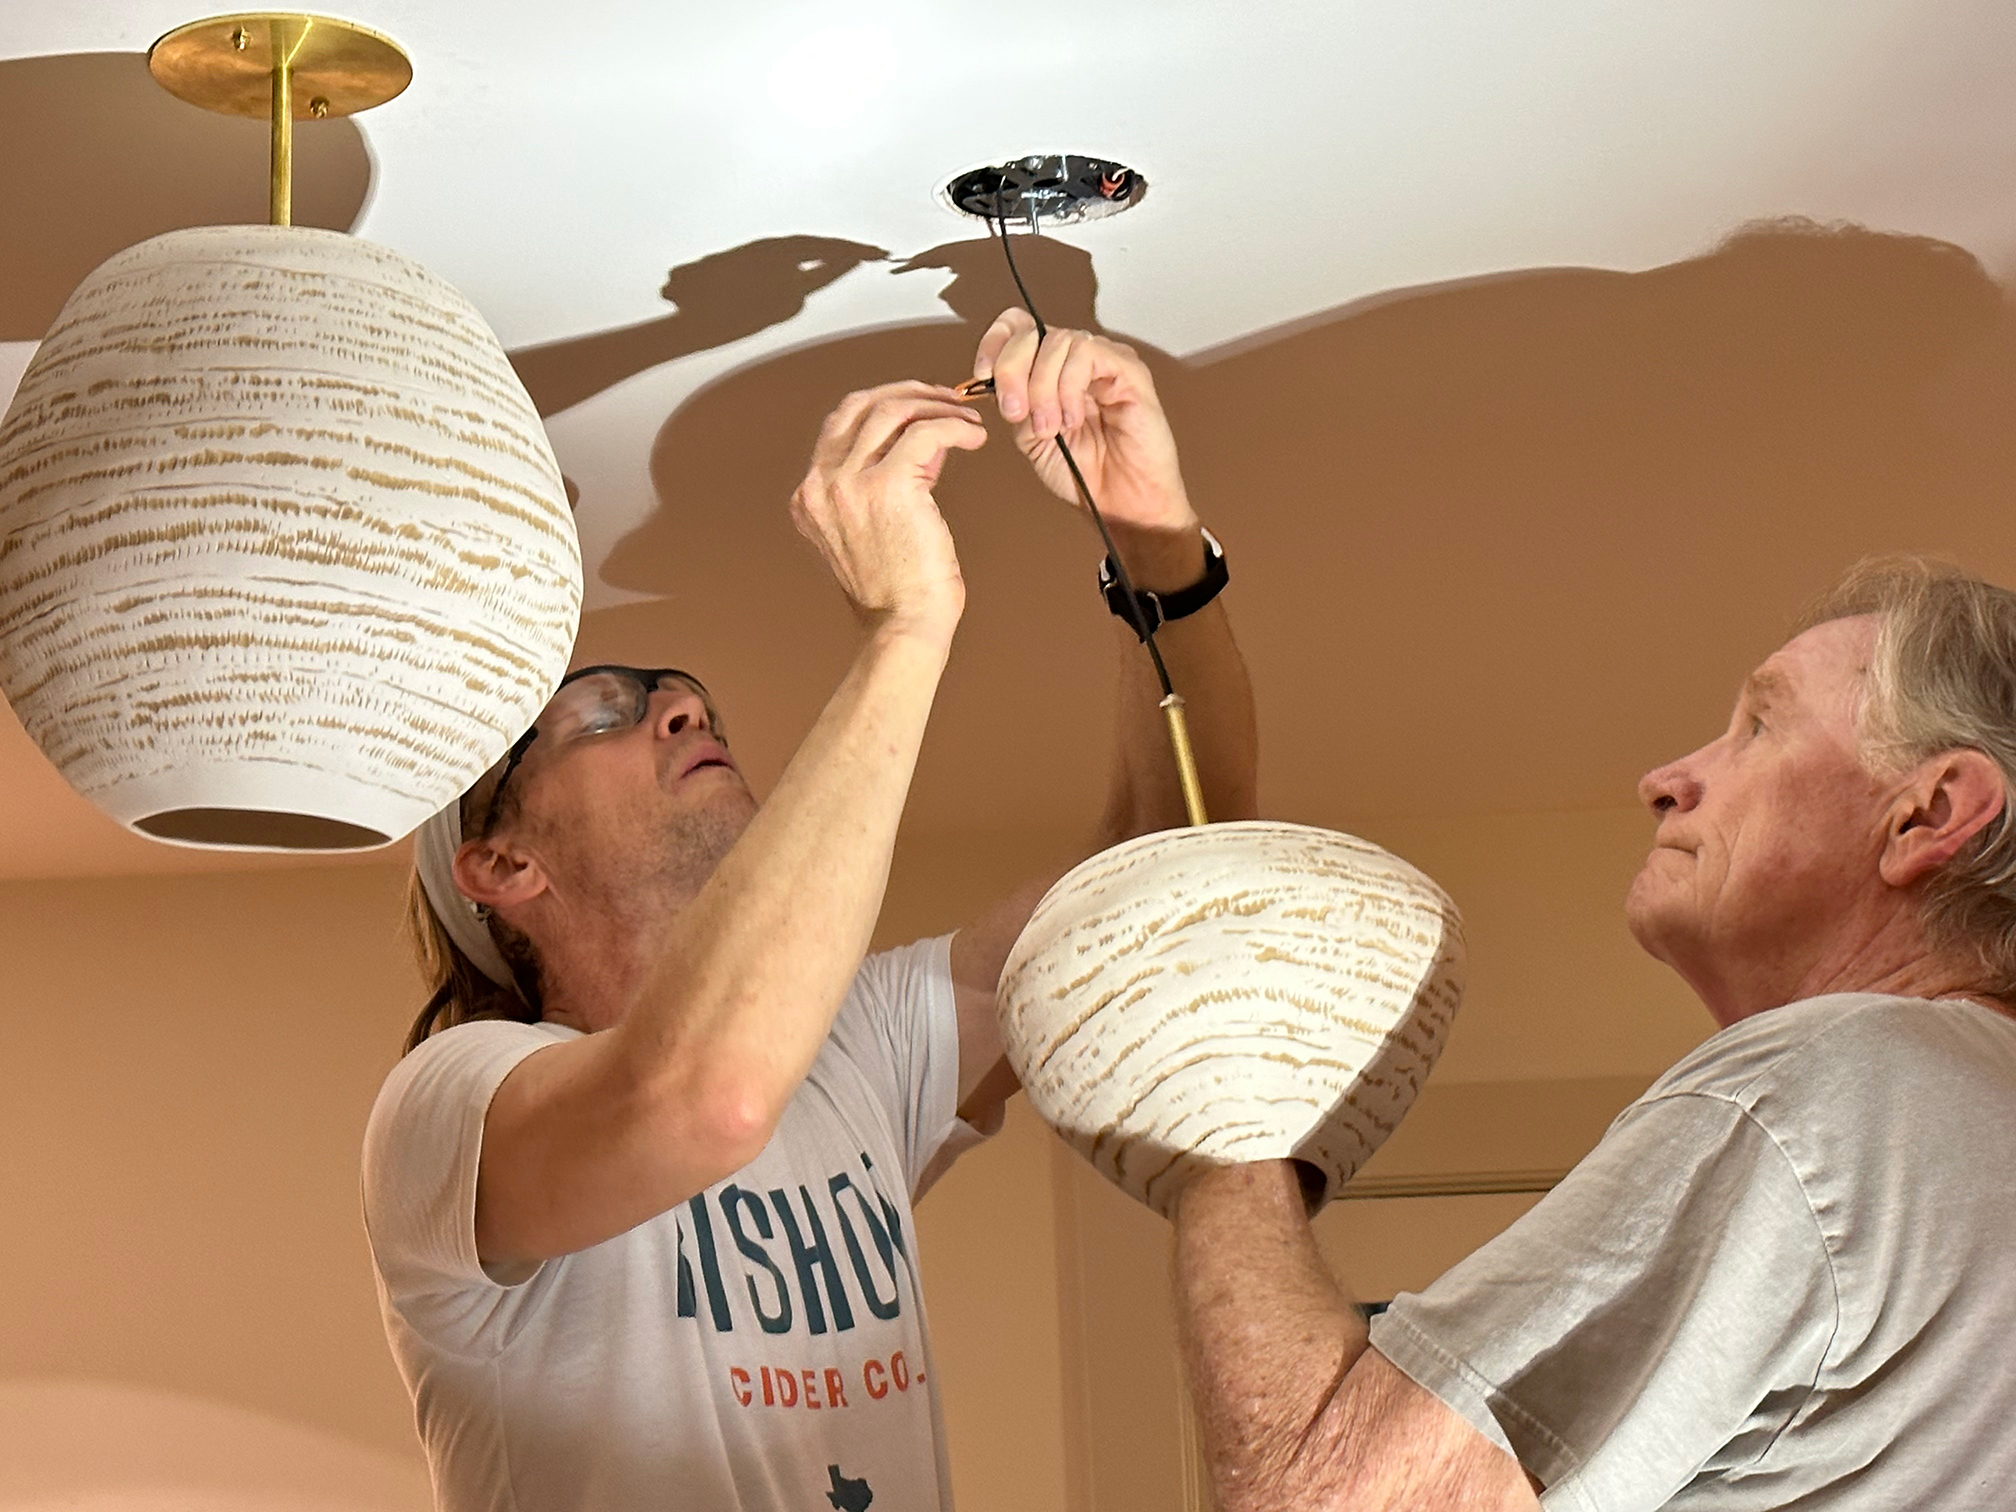 installing porcelain lights created by Lisa Ehrich